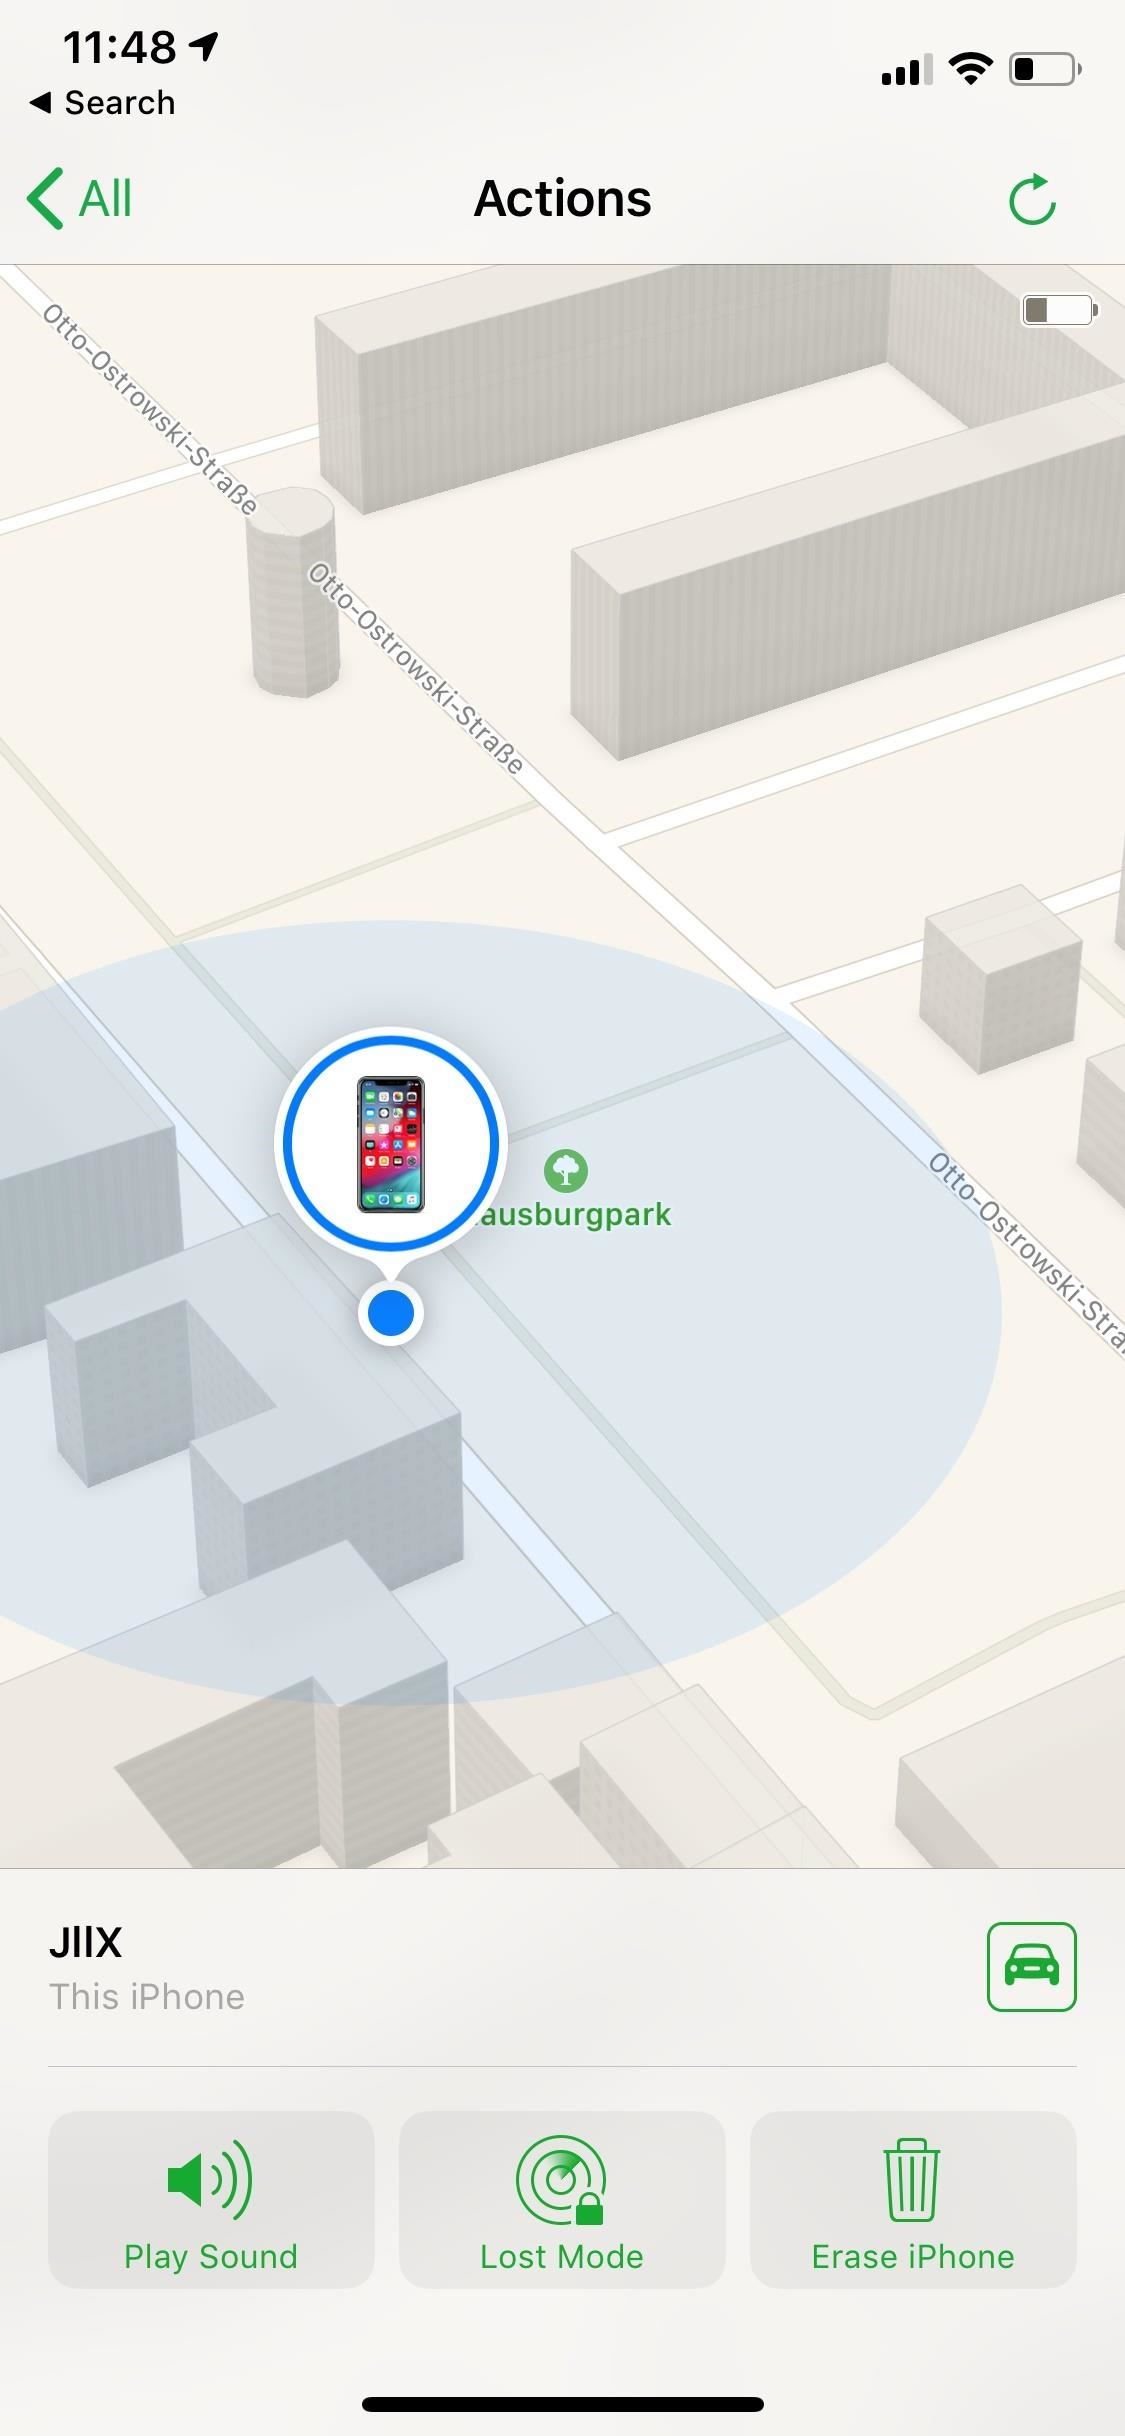 What to Do After Your iPhone Is Lost or Stolen — The Ultimate Guide